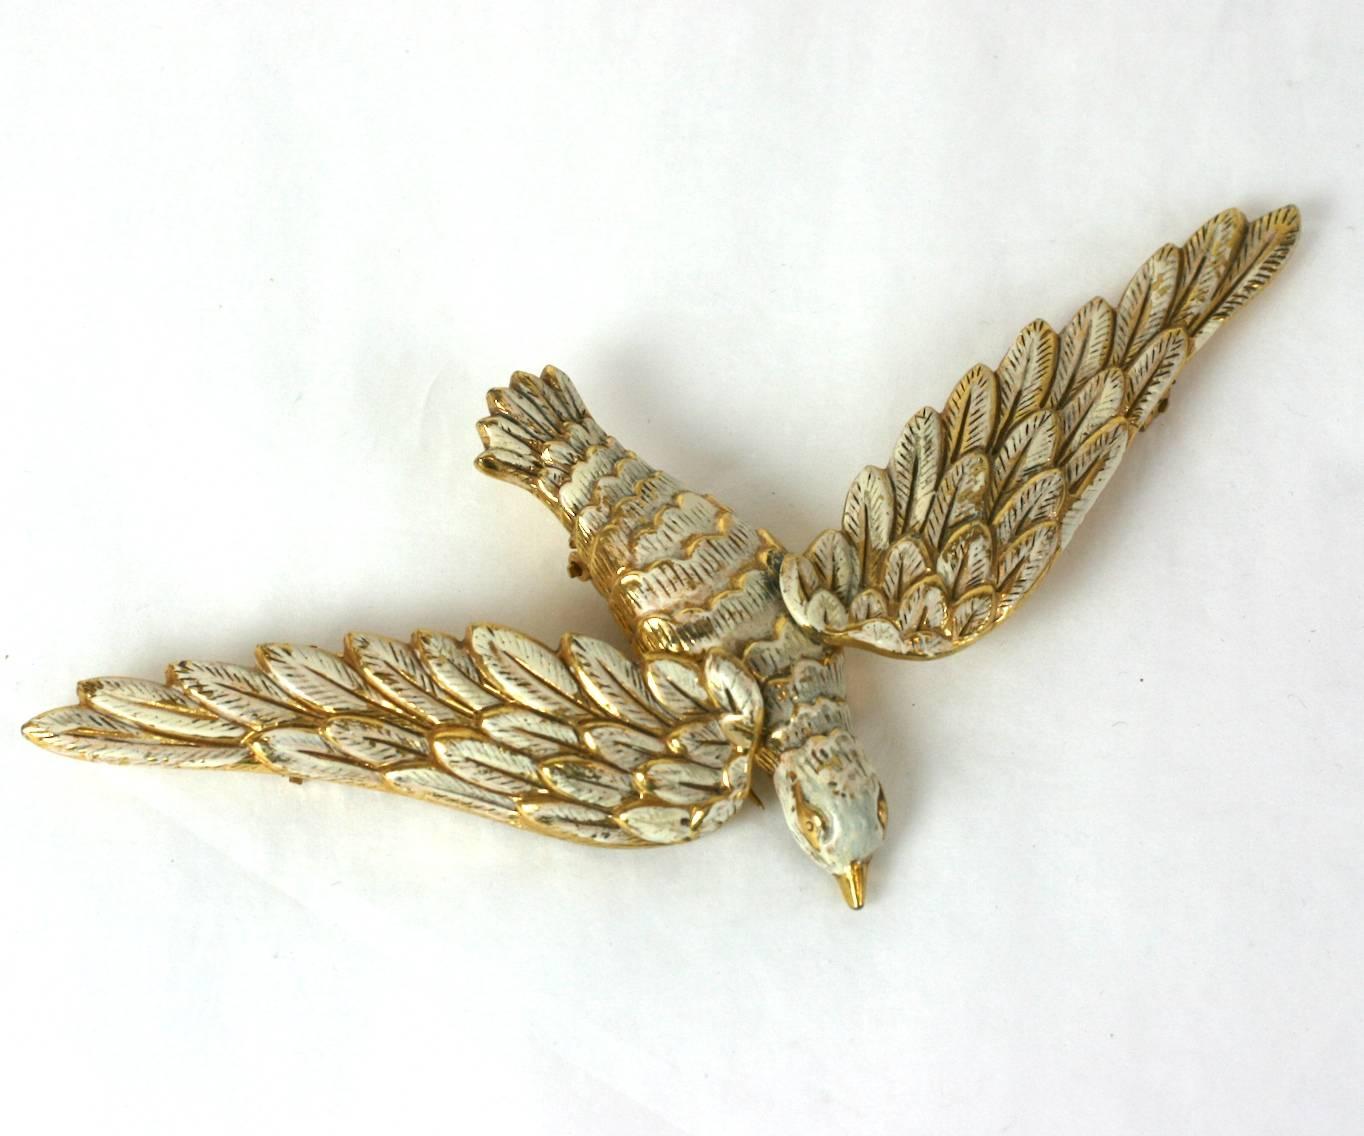 Unusual articulated Art Deco flying dove brooch of gilt metal and off white enamel. Wings can be positioned in different positions by changing placement of clips on garment.  Excellent Condition. 1940's USA.
L 3.75